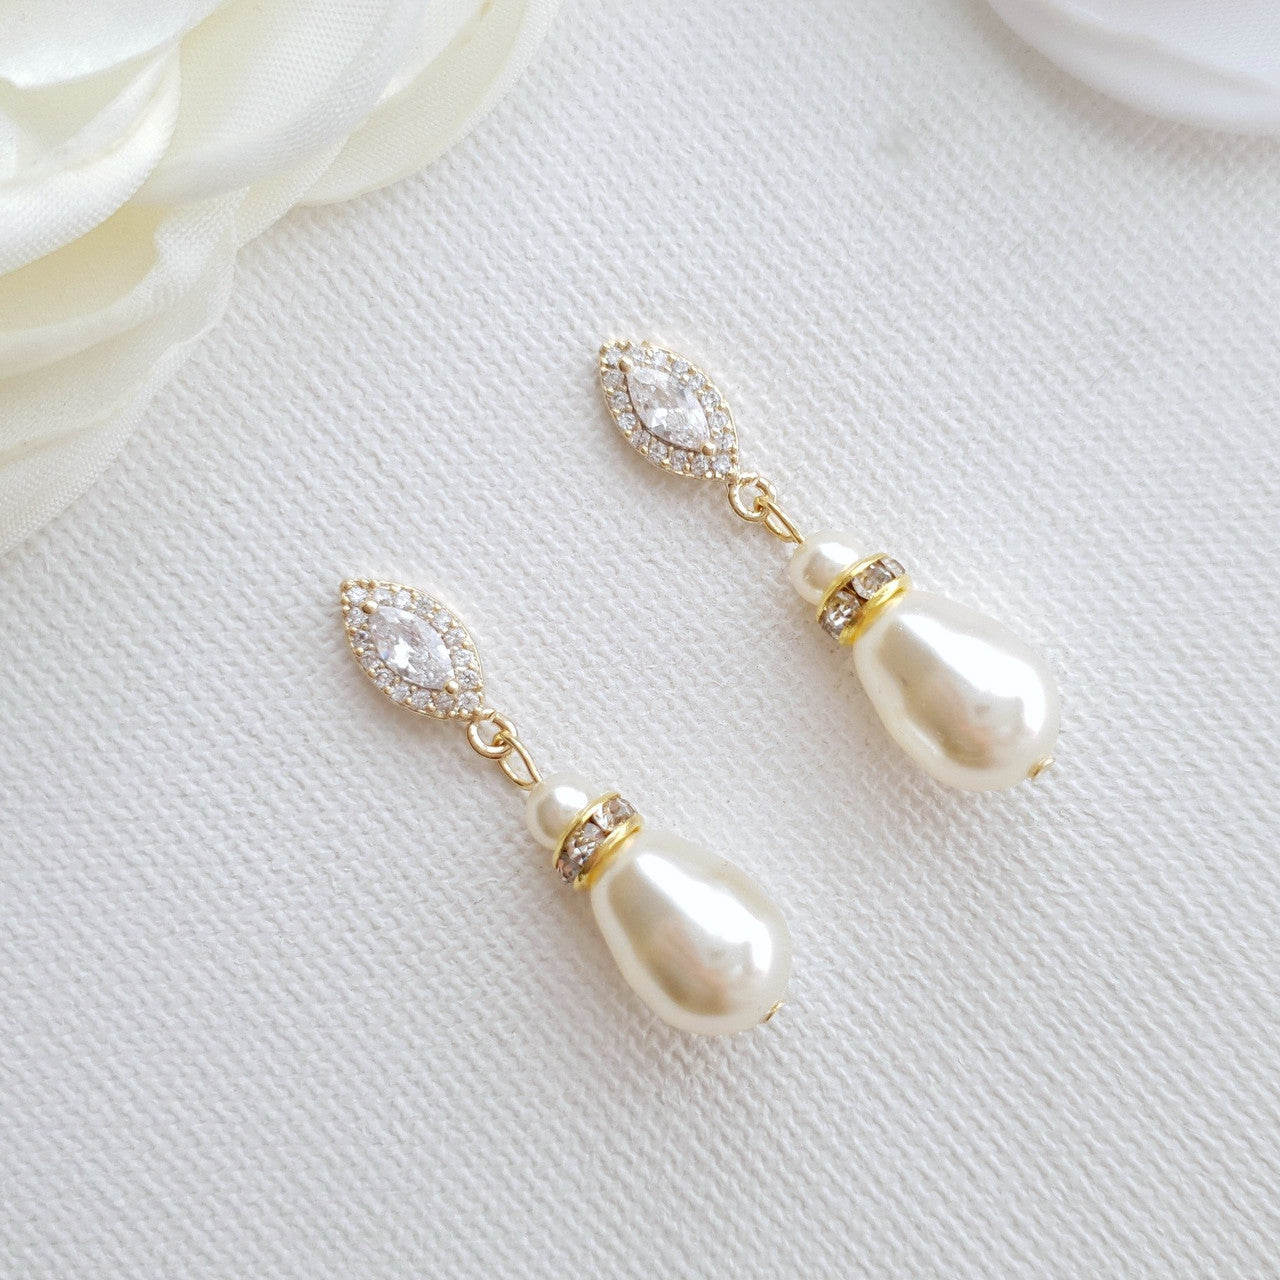 Bridesmaids Jewellery Gift with Pearl Earrings Necklace Set- Ella